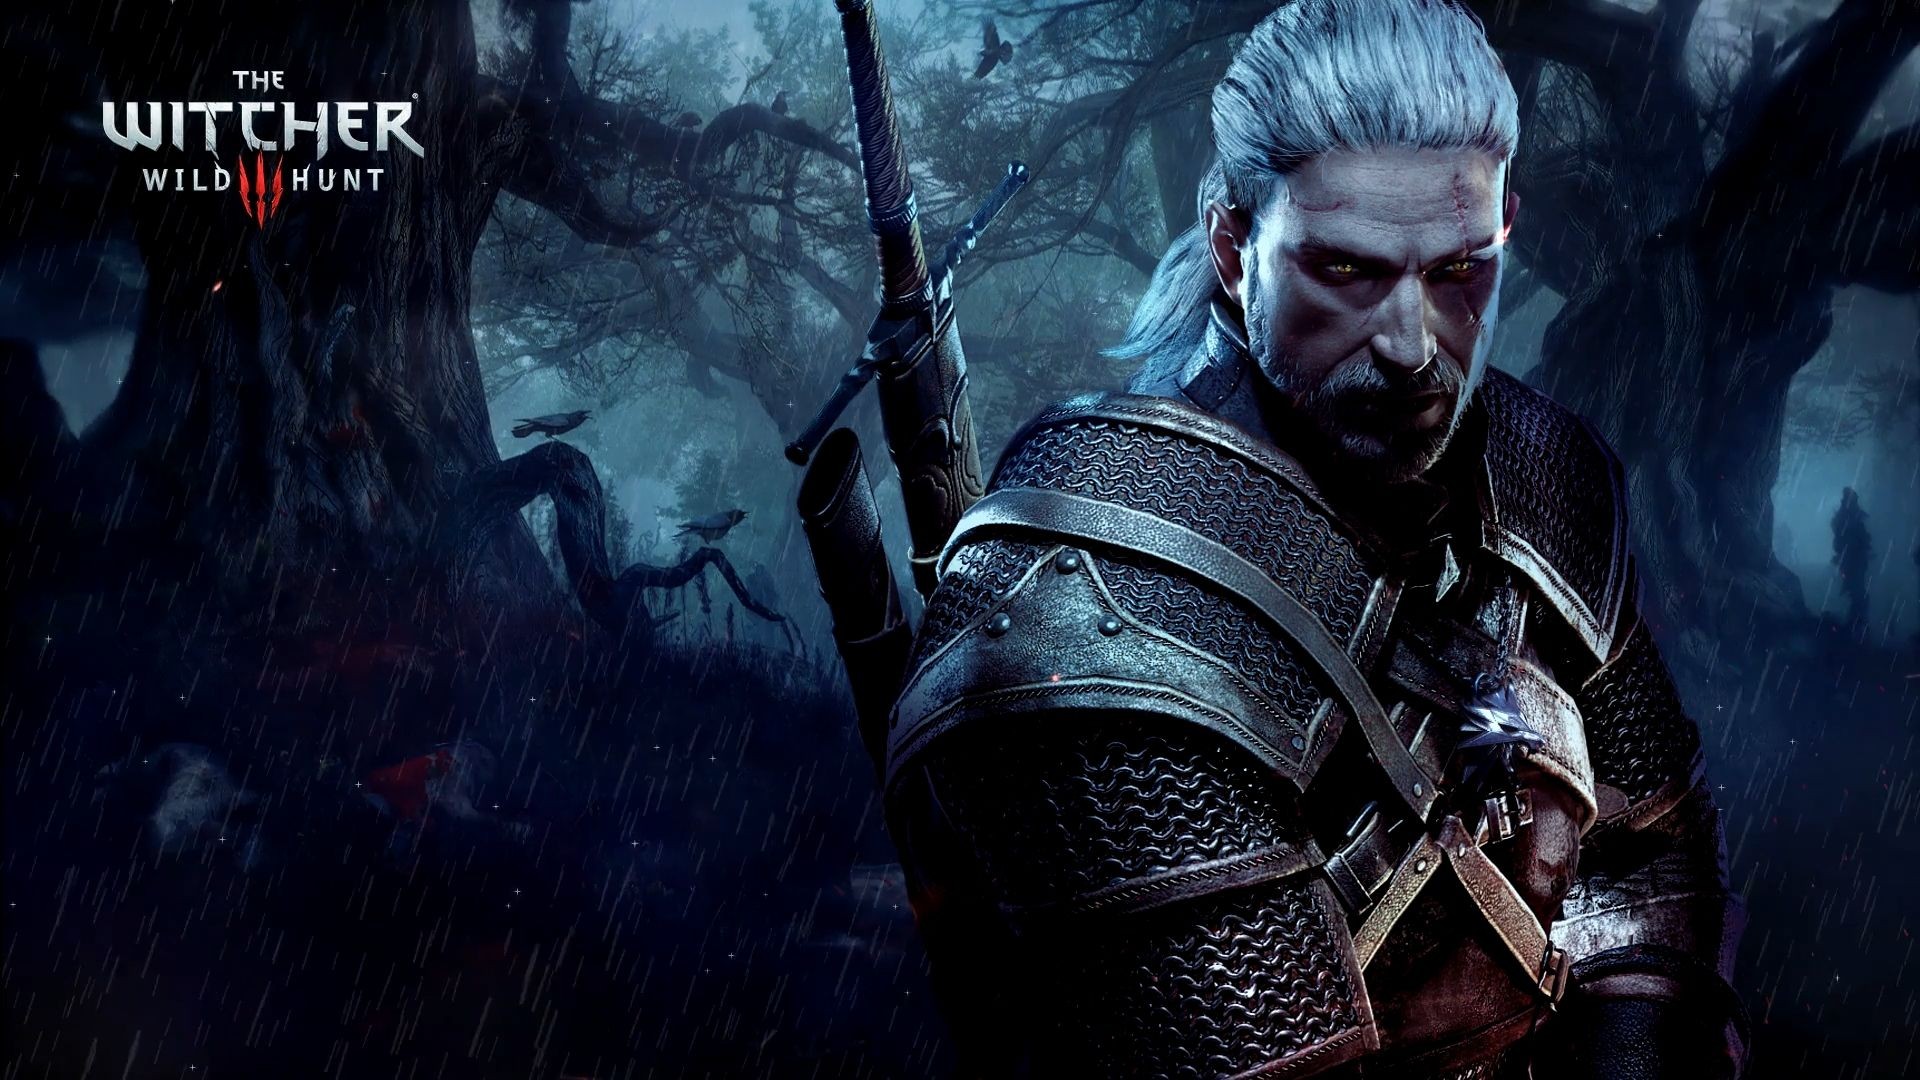 The Witcher Wild Hunt Backgrounds with high-resolution 1920x1080 pixel. You can use this poster wallpaper for your Desktop Computers, Mac Screensavers, Windows Backgrounds, iPhone Wallpapers, Tablet or Android Lock screen and another Mobile device